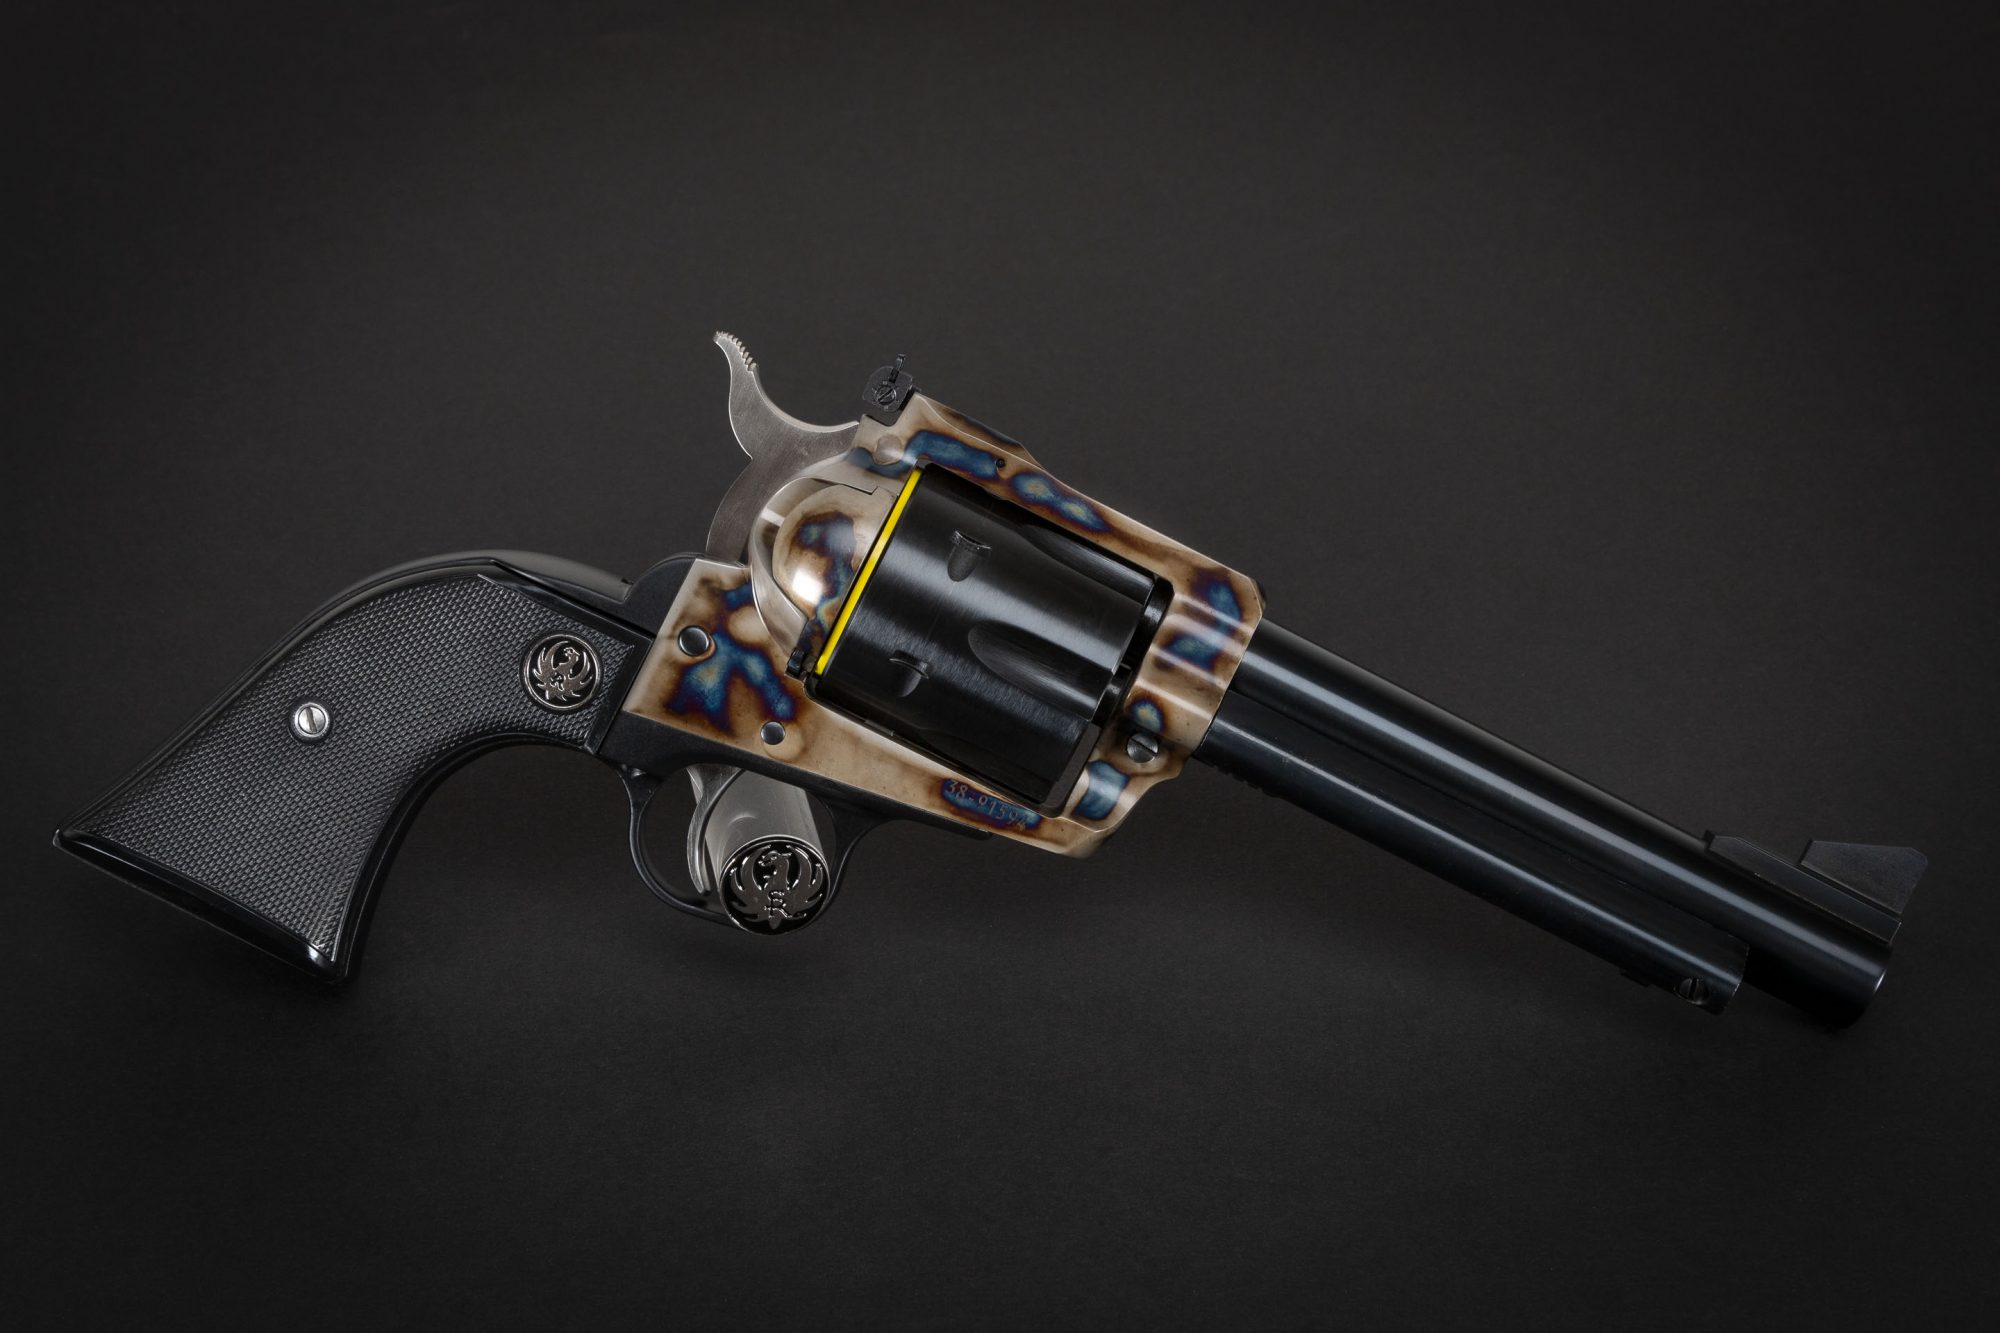 Photo of a Ruger New Model Blackhawk single action revolver, featuring restoration-grade metal finishes by Turnbull Restoration of Bloomfield, NY